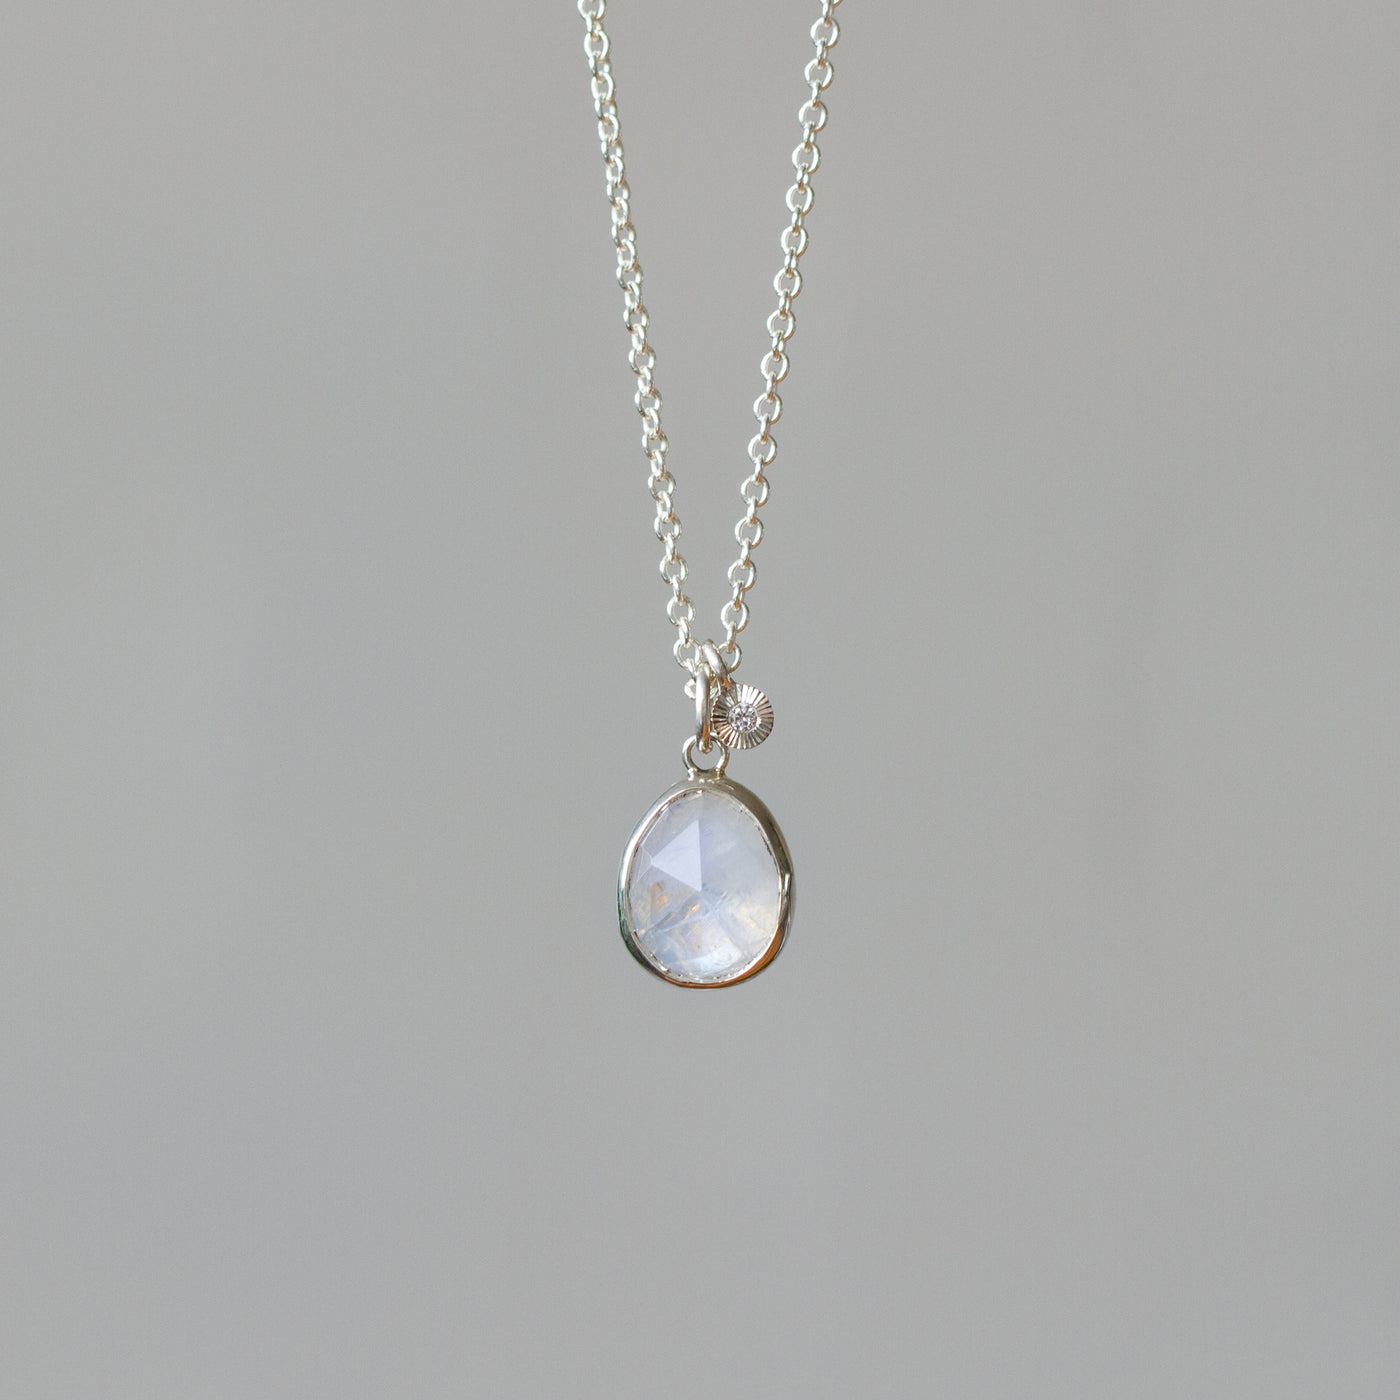 Rose Cut Moonstone Silver Theia Necklace #9 hanging in front of a white wall, front angle